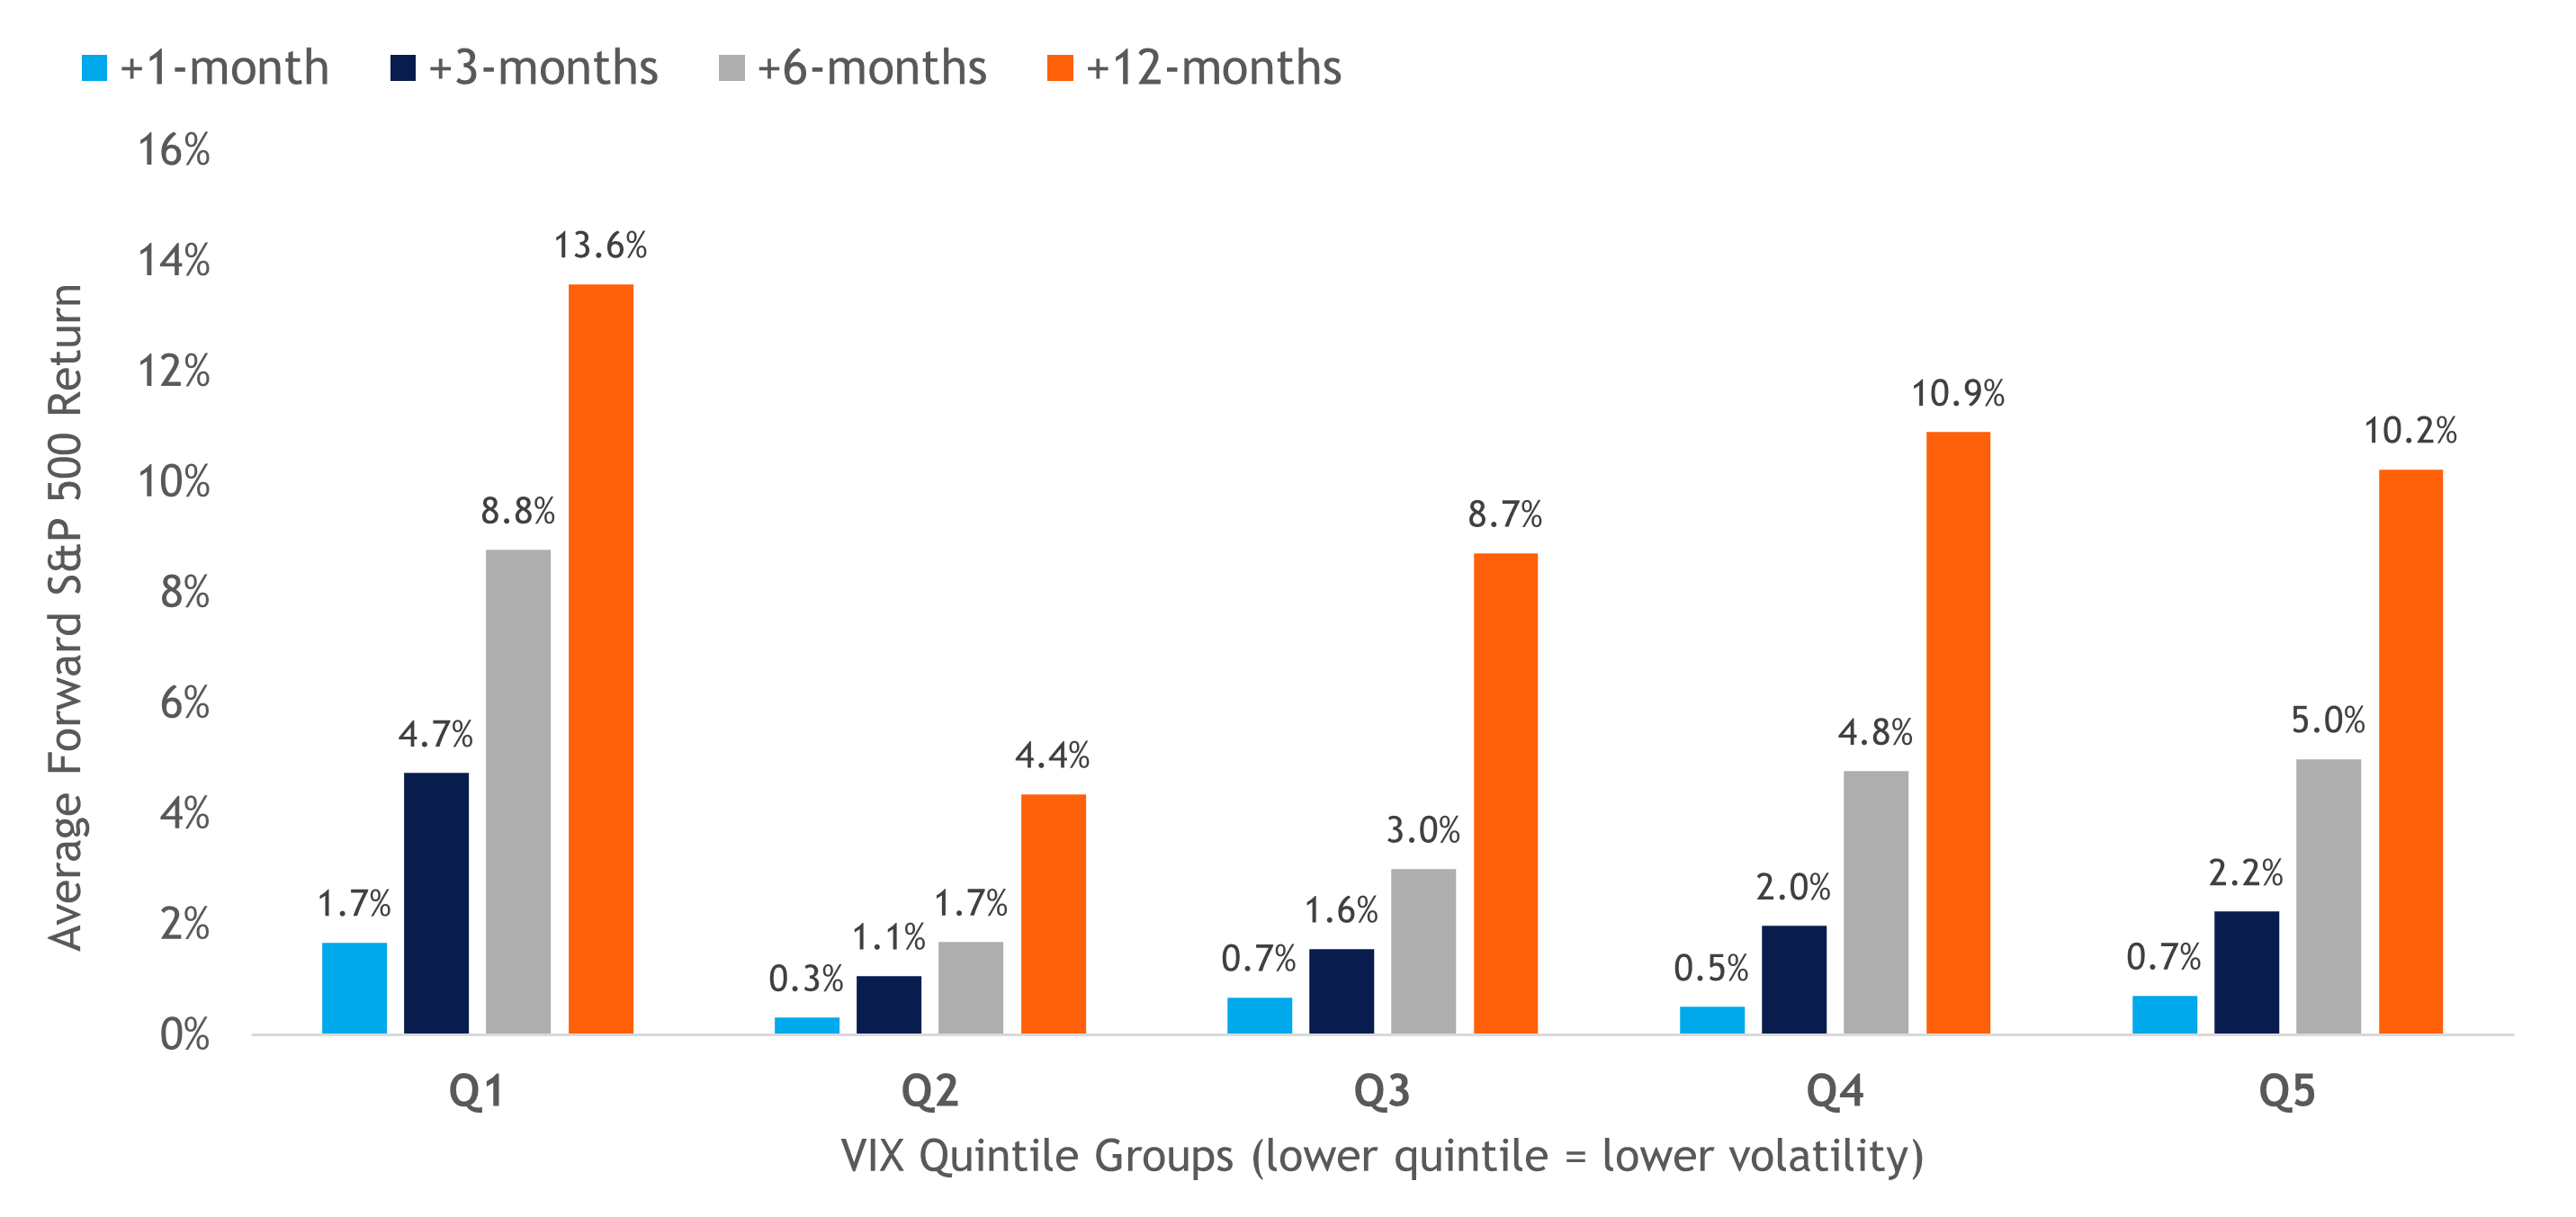 Bar graph of average forward S&P 500 returns based on VIX quintile groups for one, three, six, and 12 months as described in preceding paragraph. 